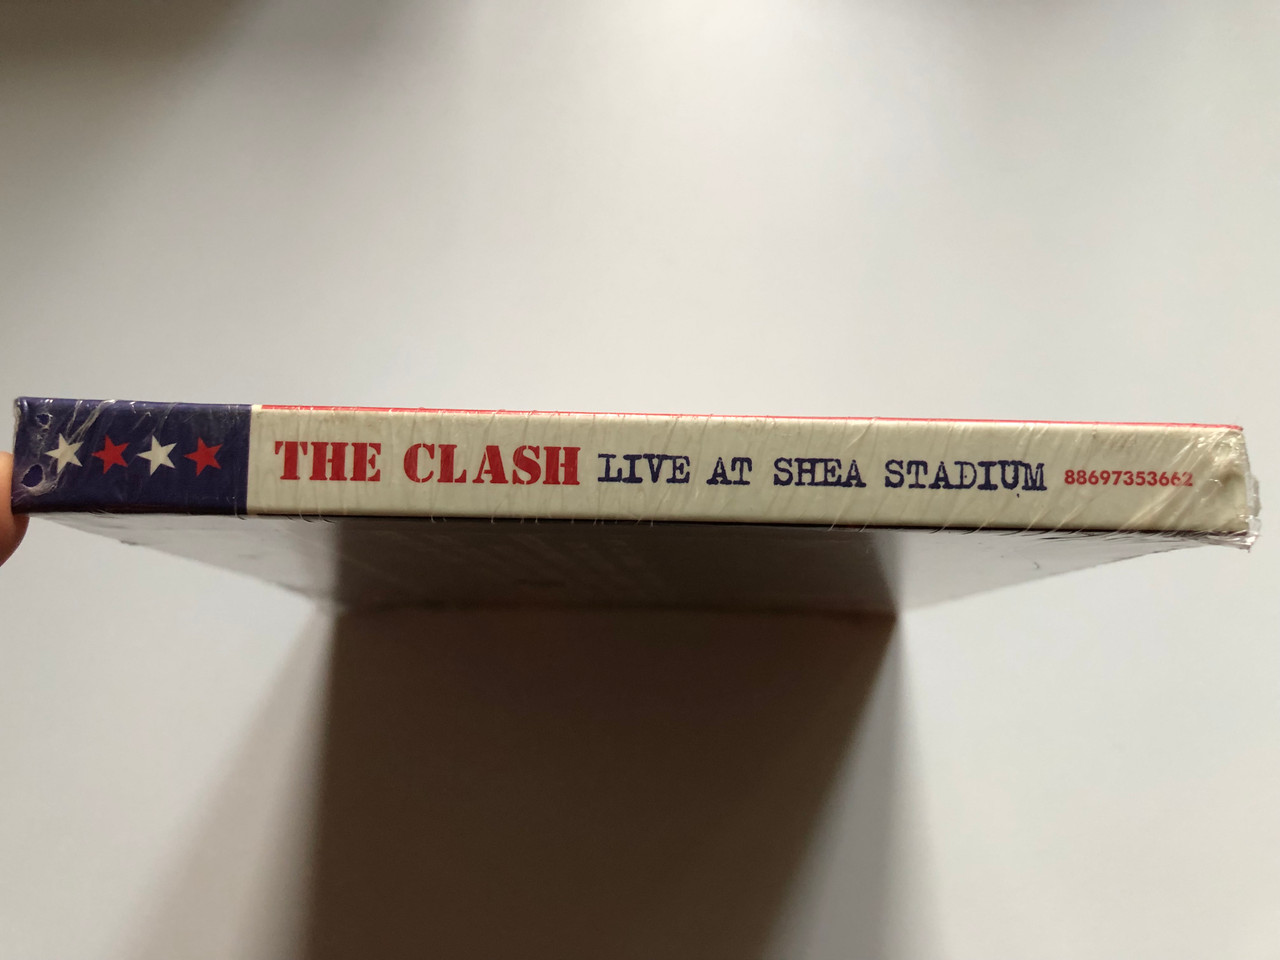 https://cdn10.bigcommerce.com/s-62bdpkt7pb/products/0/images/249237/The_Clash_Live_At_Shea_Stadium_Limited_Deluxe_Edition_With_24_Page_Booklet_October_13th_1982_Shea_Stadion_New_York_Experience_The_Intensity_Of_The_Clash_Live_Sony_BMG_Music_Enterta_3__90267.1660840826.1280.1280.JPG?c=2&_gl=1*s92qh7*_ga*MjA2NTIxMjE2MC4xNTkwNTEyNTMy*_ga_WS2VZYPC6G*MTY2MDgyNjg1NS41MzEuMS4xNjYwODQwODA2LjYwLjAuMA..